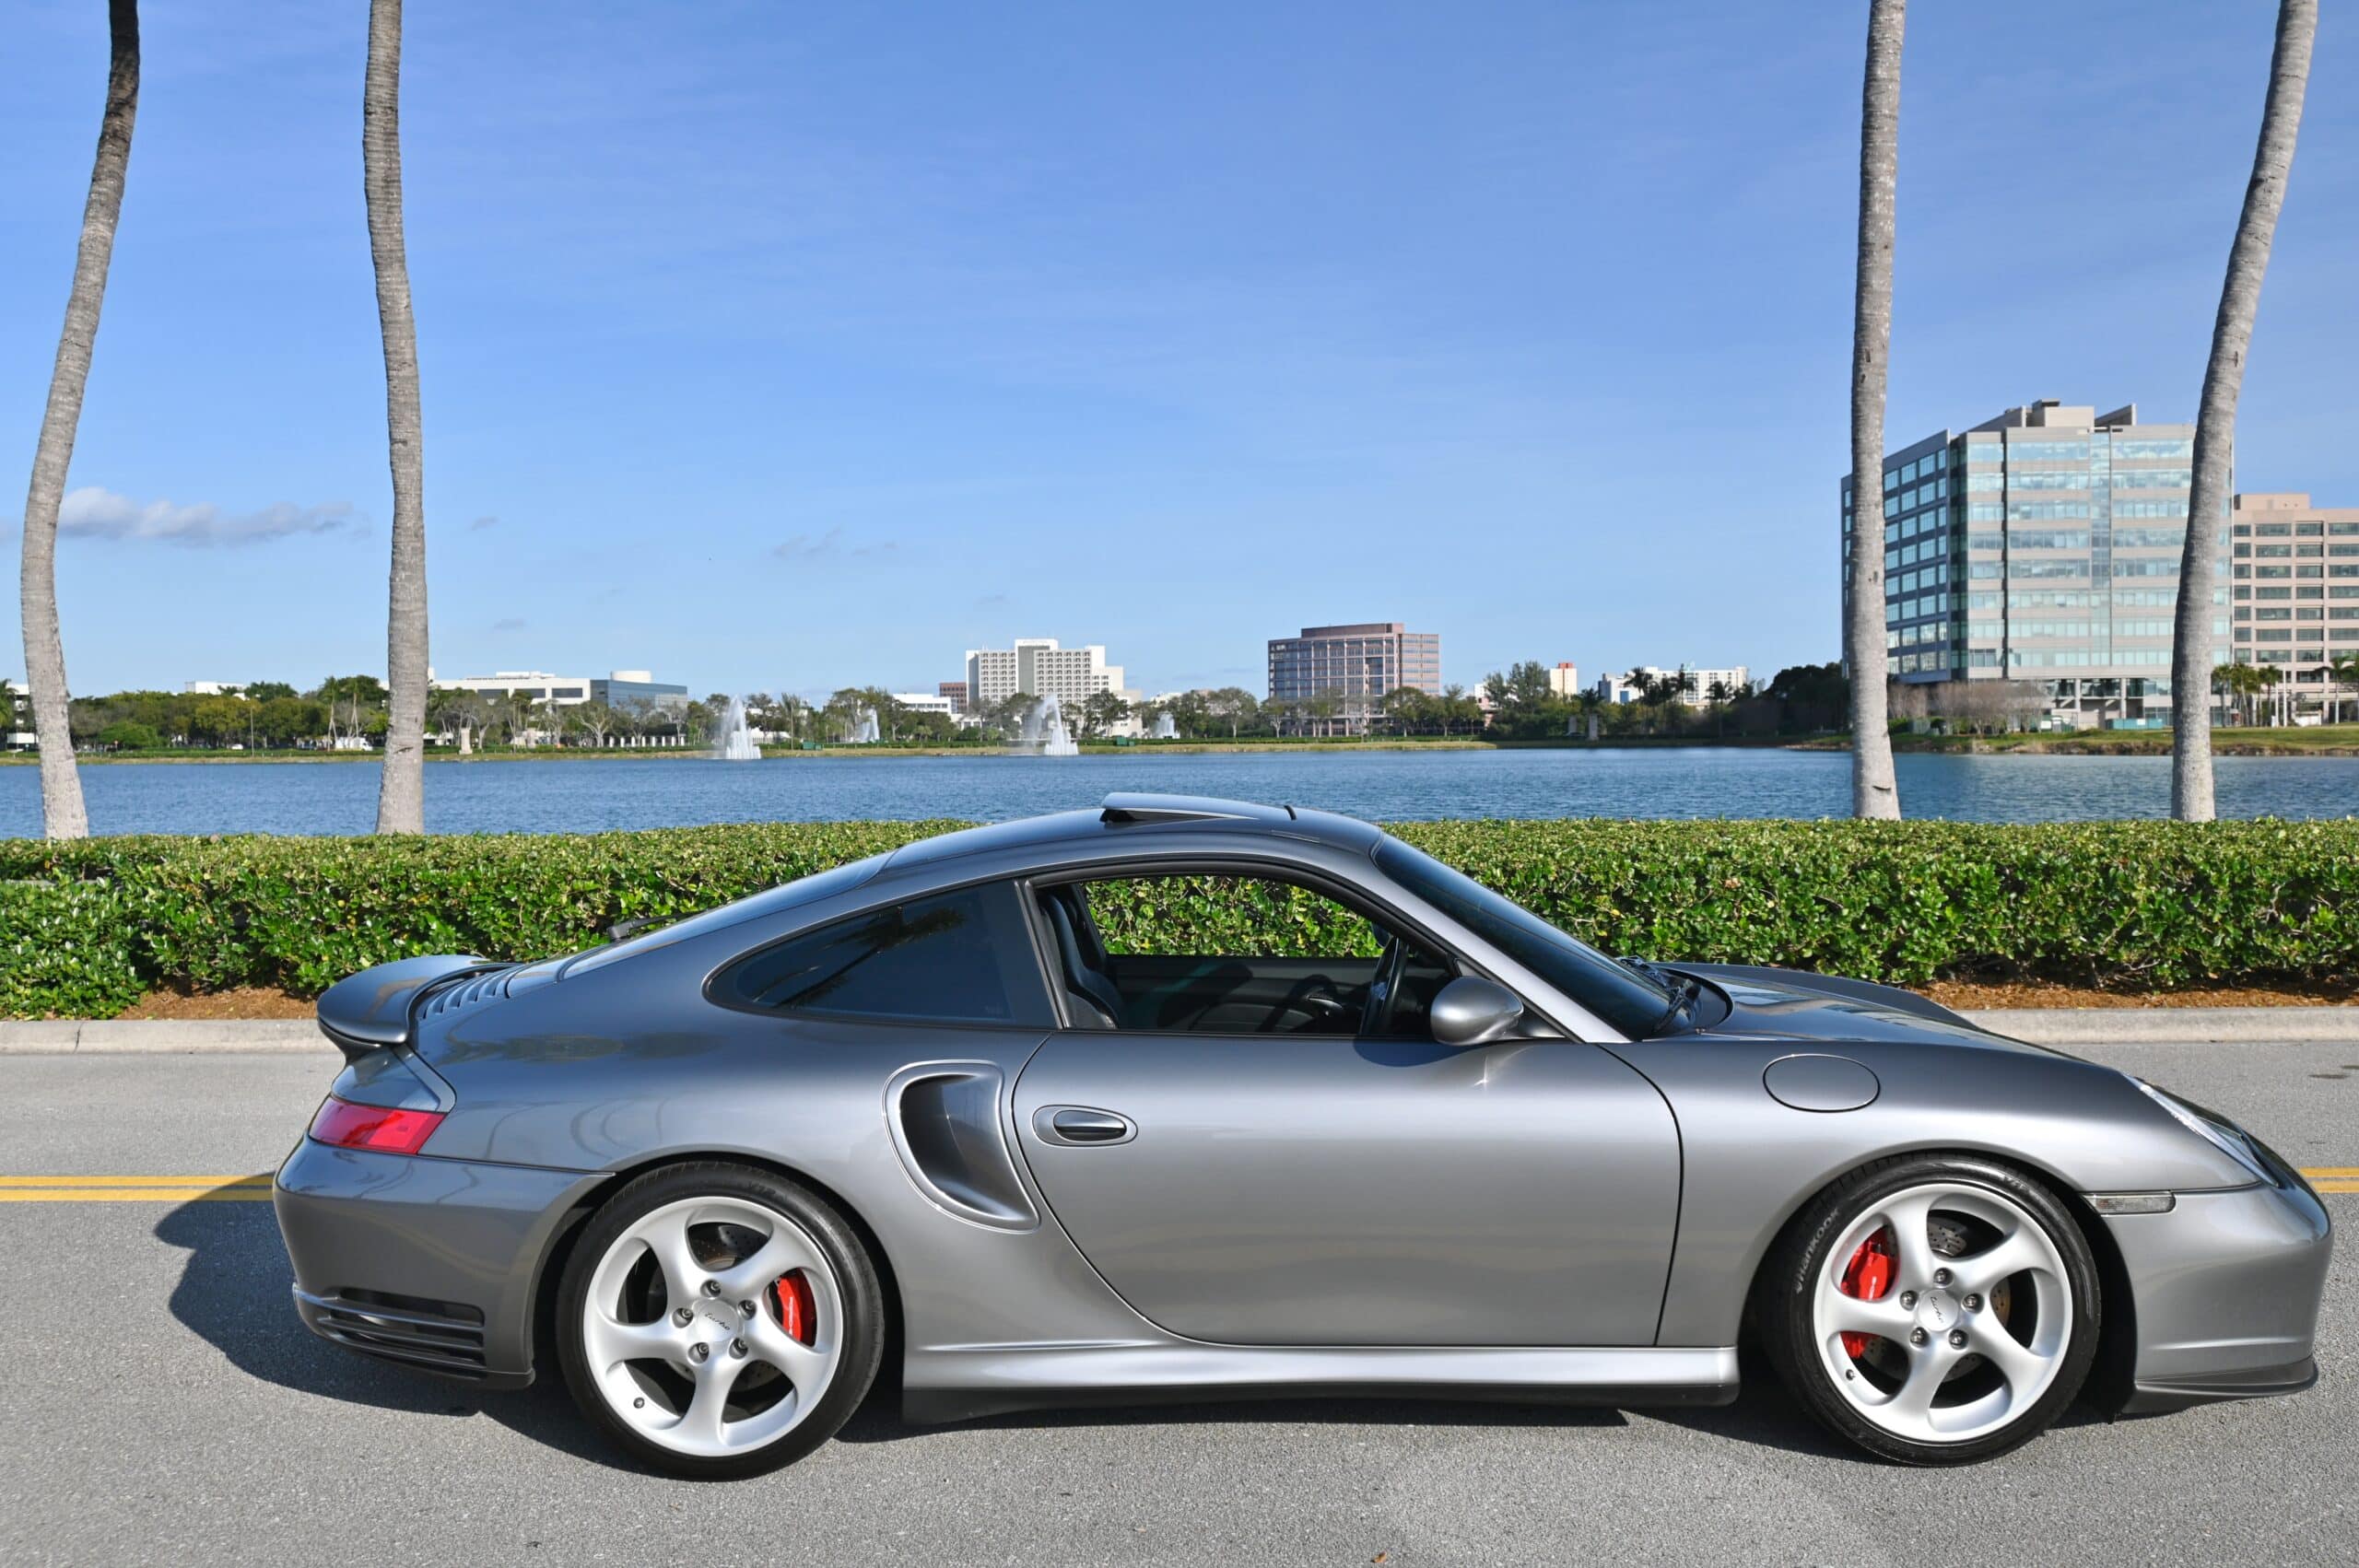 2001 Porsche 911 996 Turbo ONLY 11K MILES -Manual-Fully Loaded Factory Carbon-Sport Seats- Crazy Documented